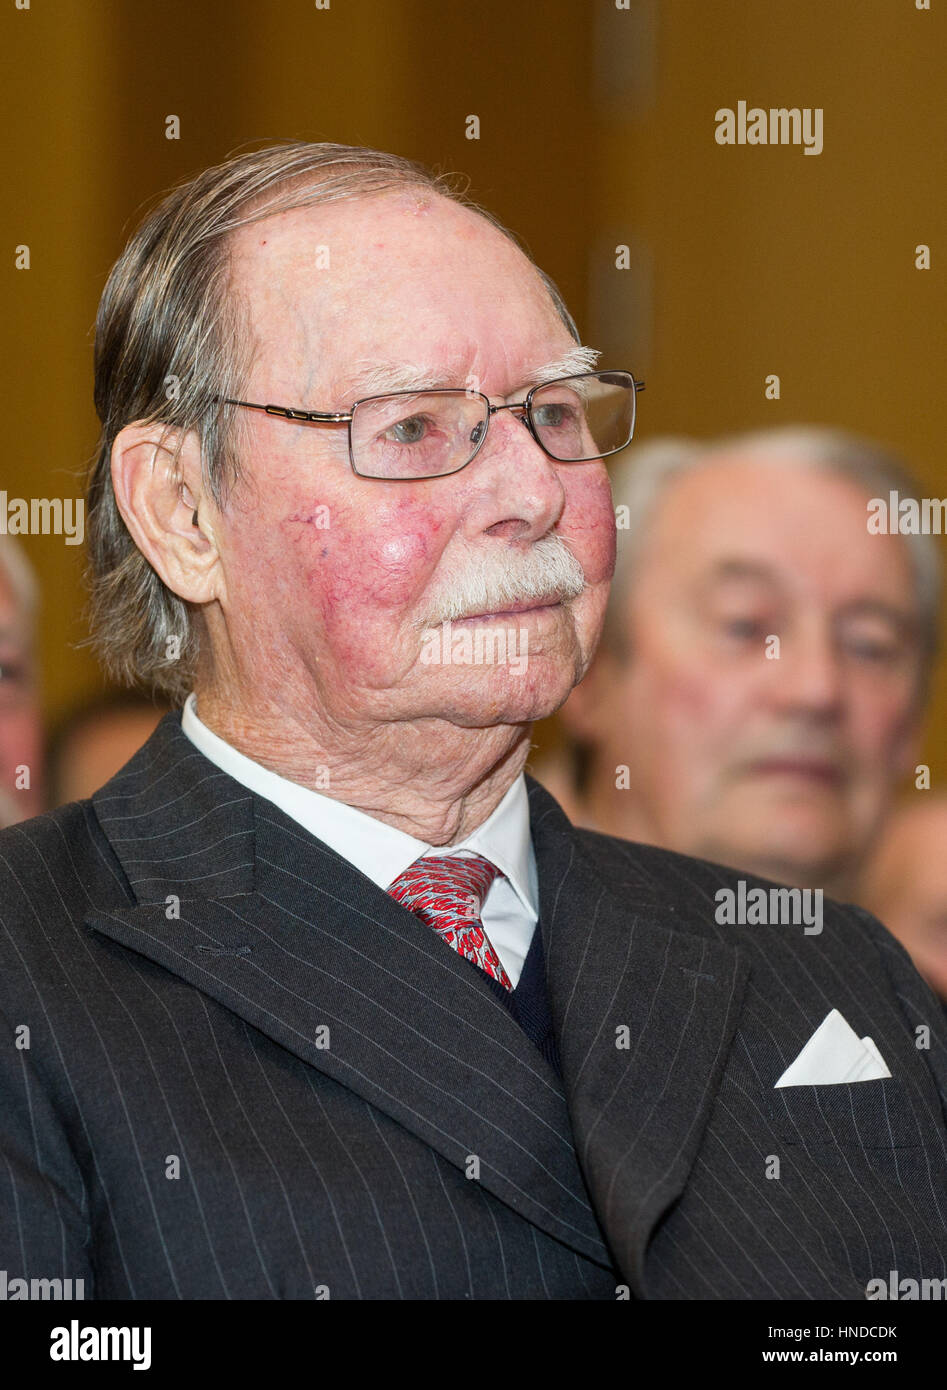 Luxembourg Grand Duc Jean (c) is pictured during the celebration of the  50th anniversary of the veterans of the Luxembourg fire workers, Echternach  Stock Photo - Alamy